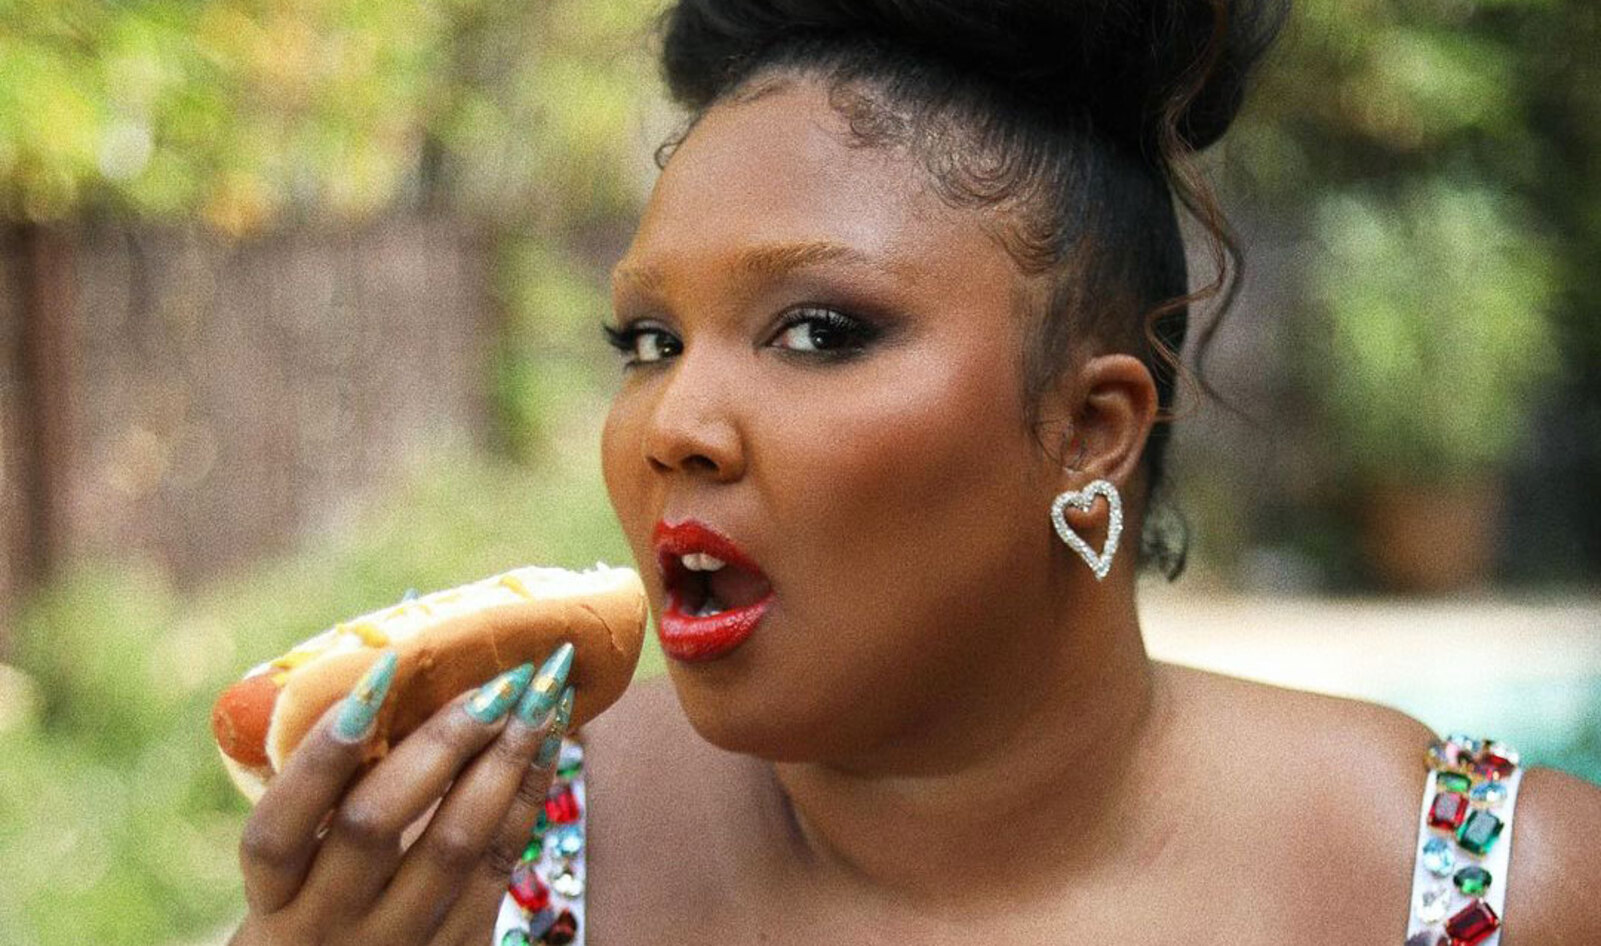 Why Lizzo's "Good As Hell" Is the New Anthem of Going Vegan